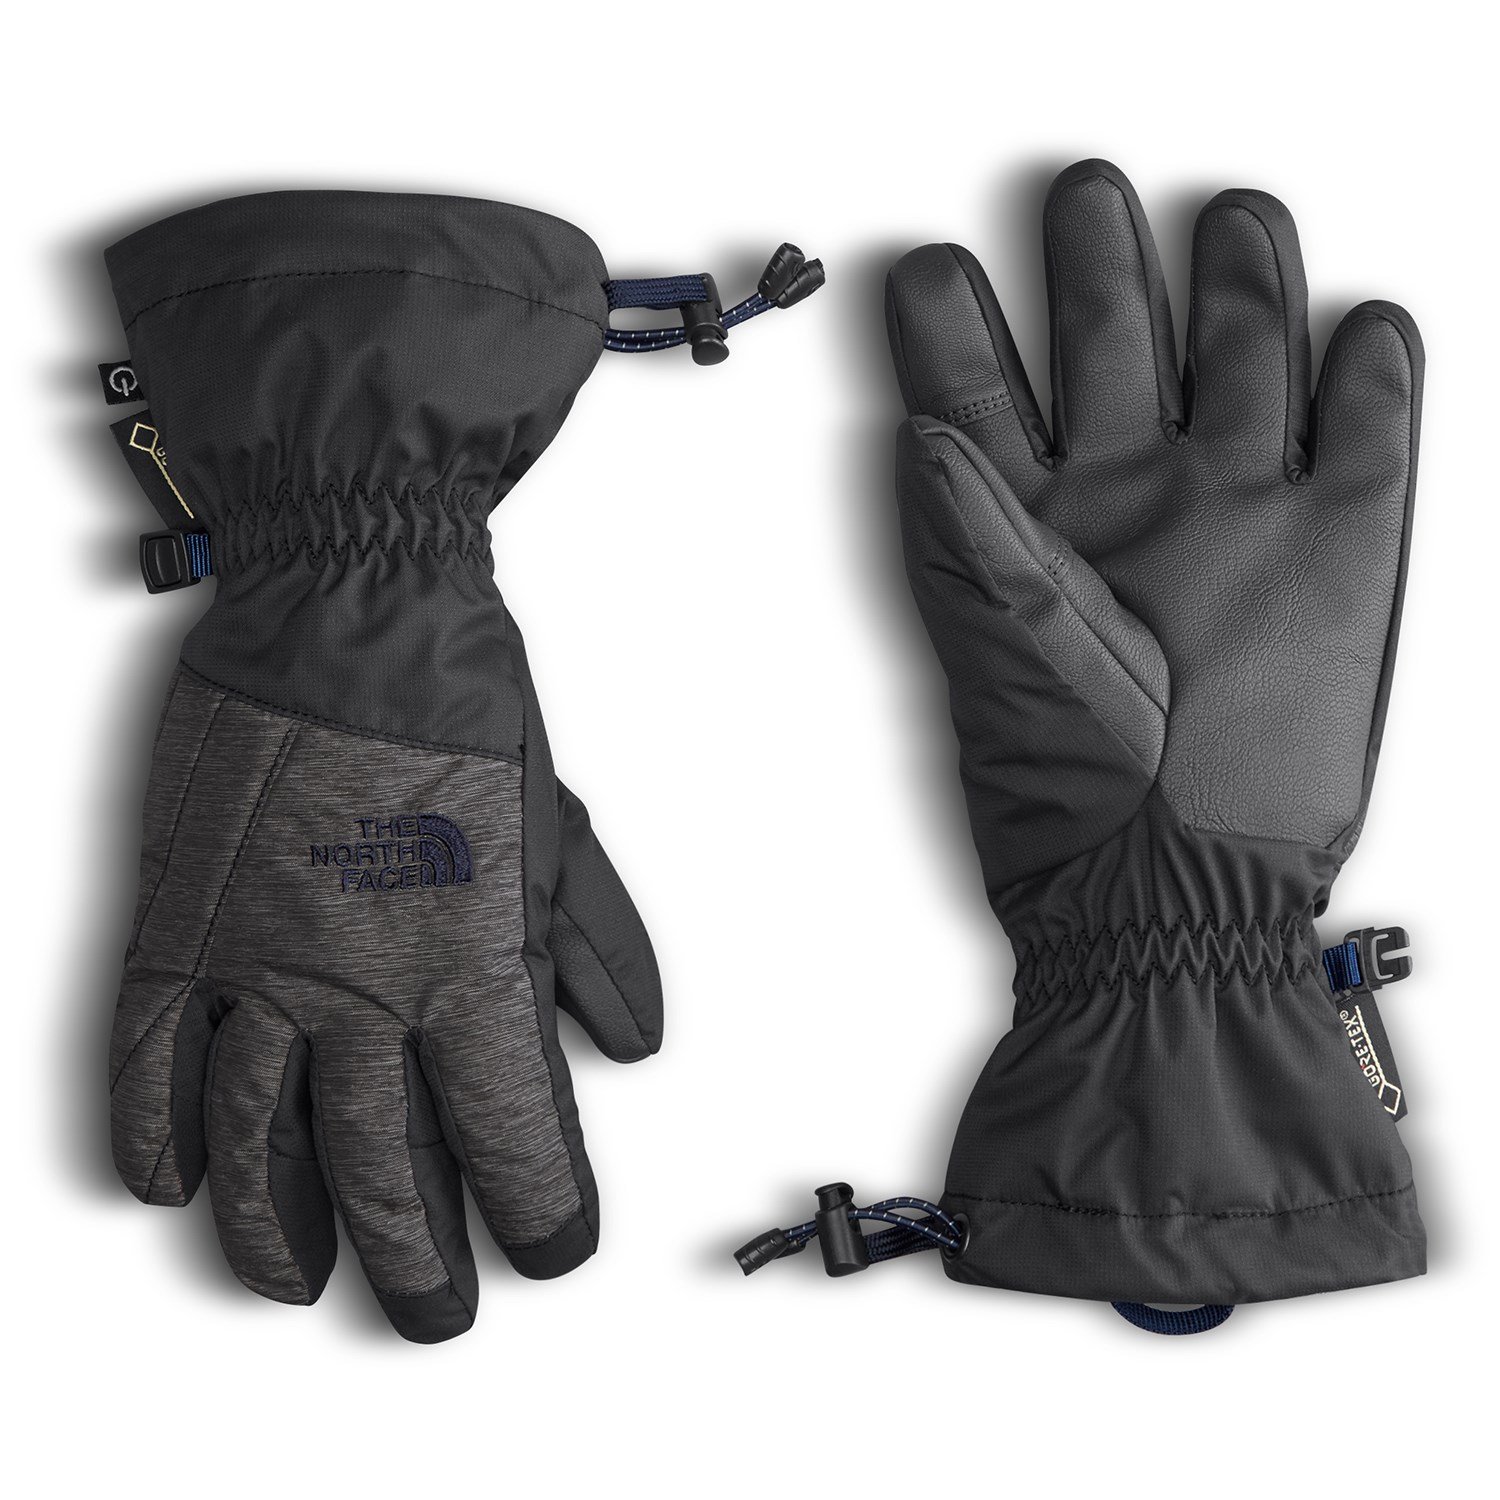 gore tex gloves north face